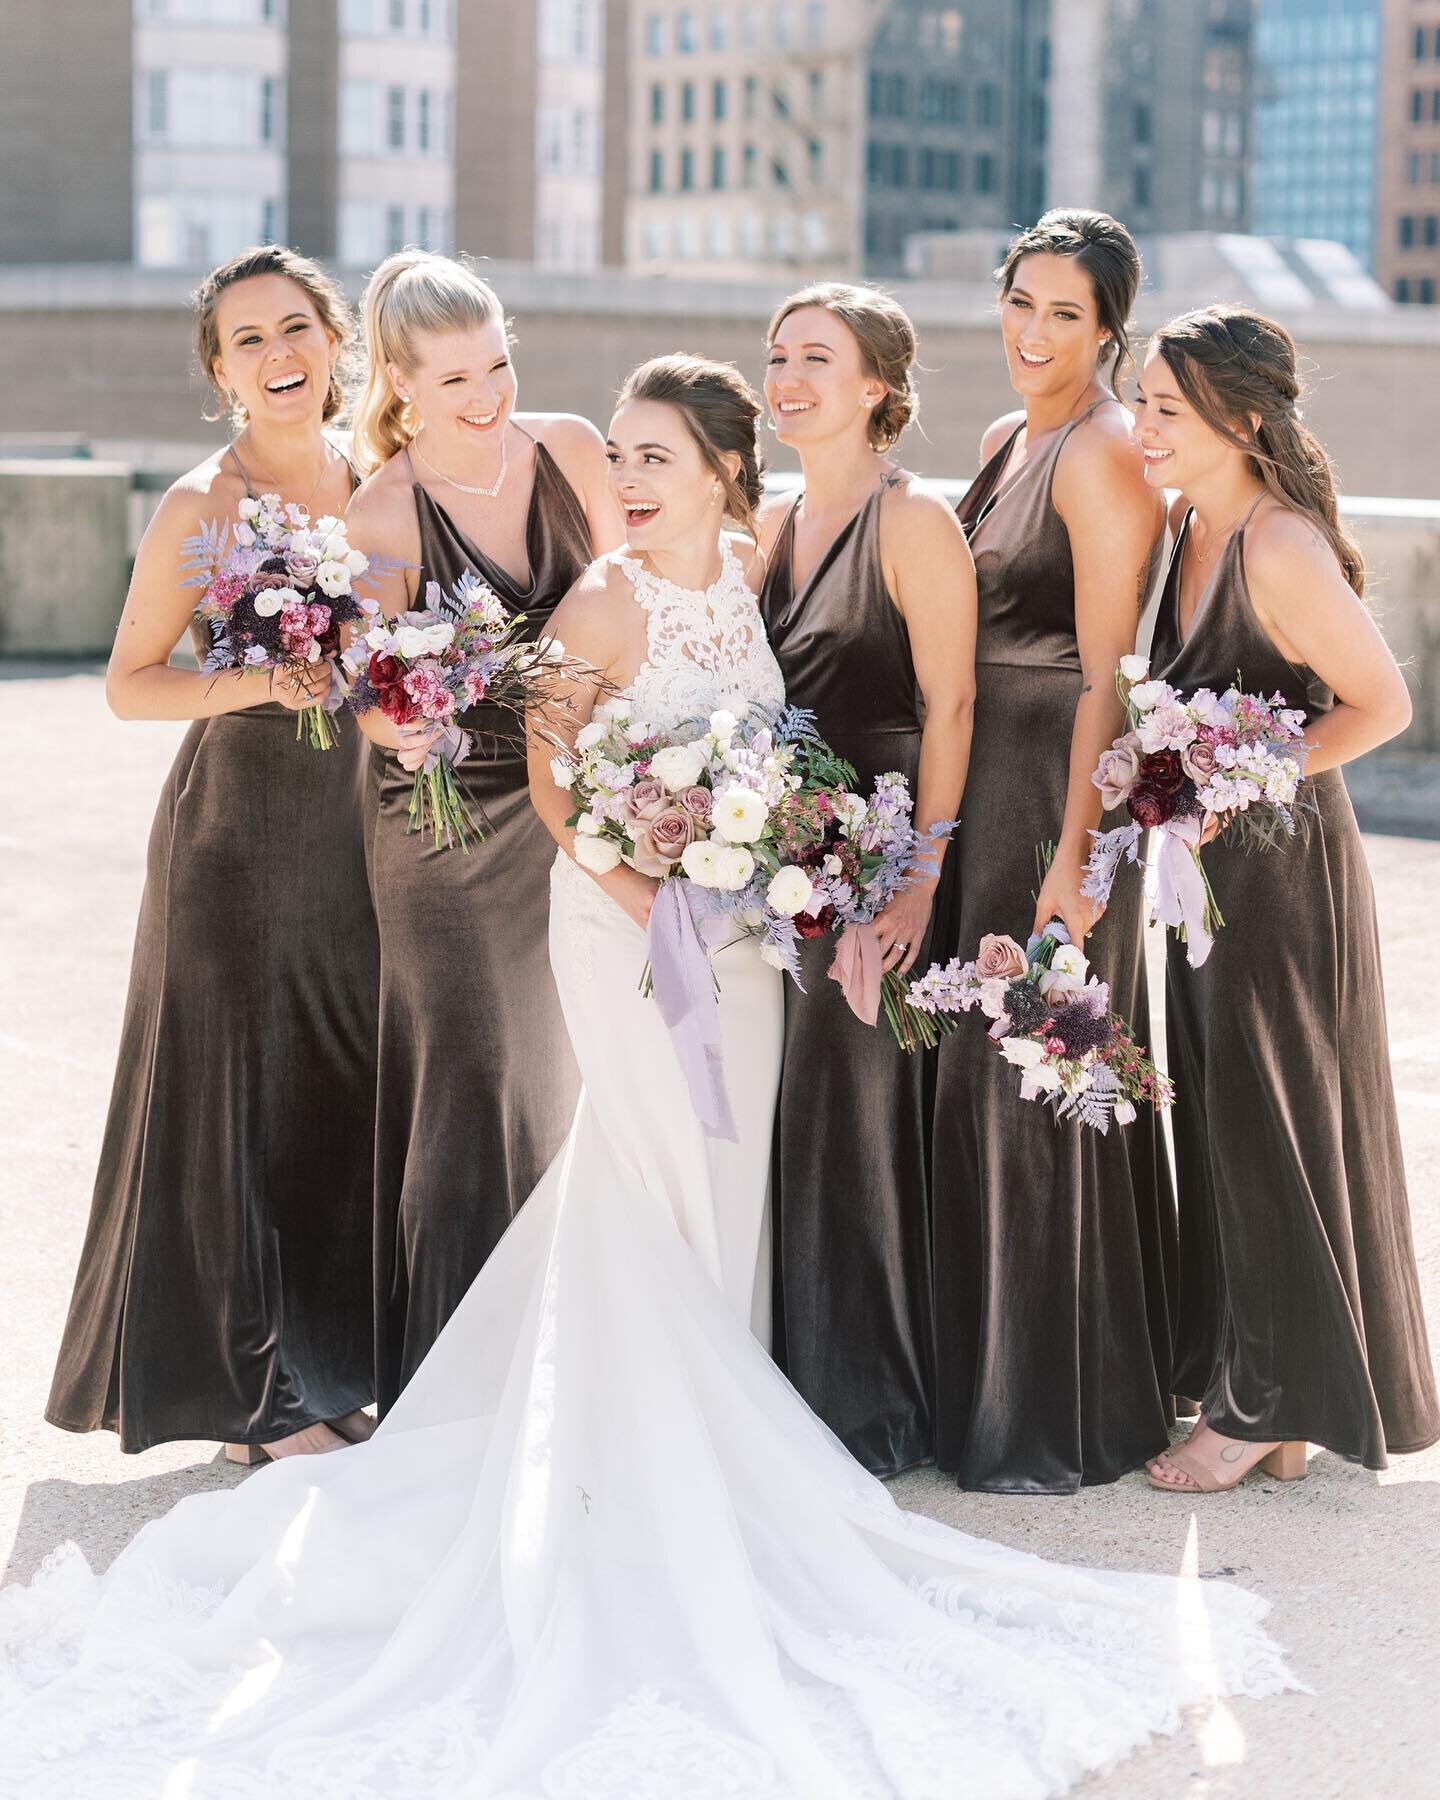 Pops of purple all over the place! Seeing Alexandria and her bridesmaids holding these fun bouquets had me smiling REALLY BIG.

photography: @courtneydueppengiesser
planner: @midwesternbride
floral: @1209creative
h&amp;m: @triciaclarkebridal
videogra